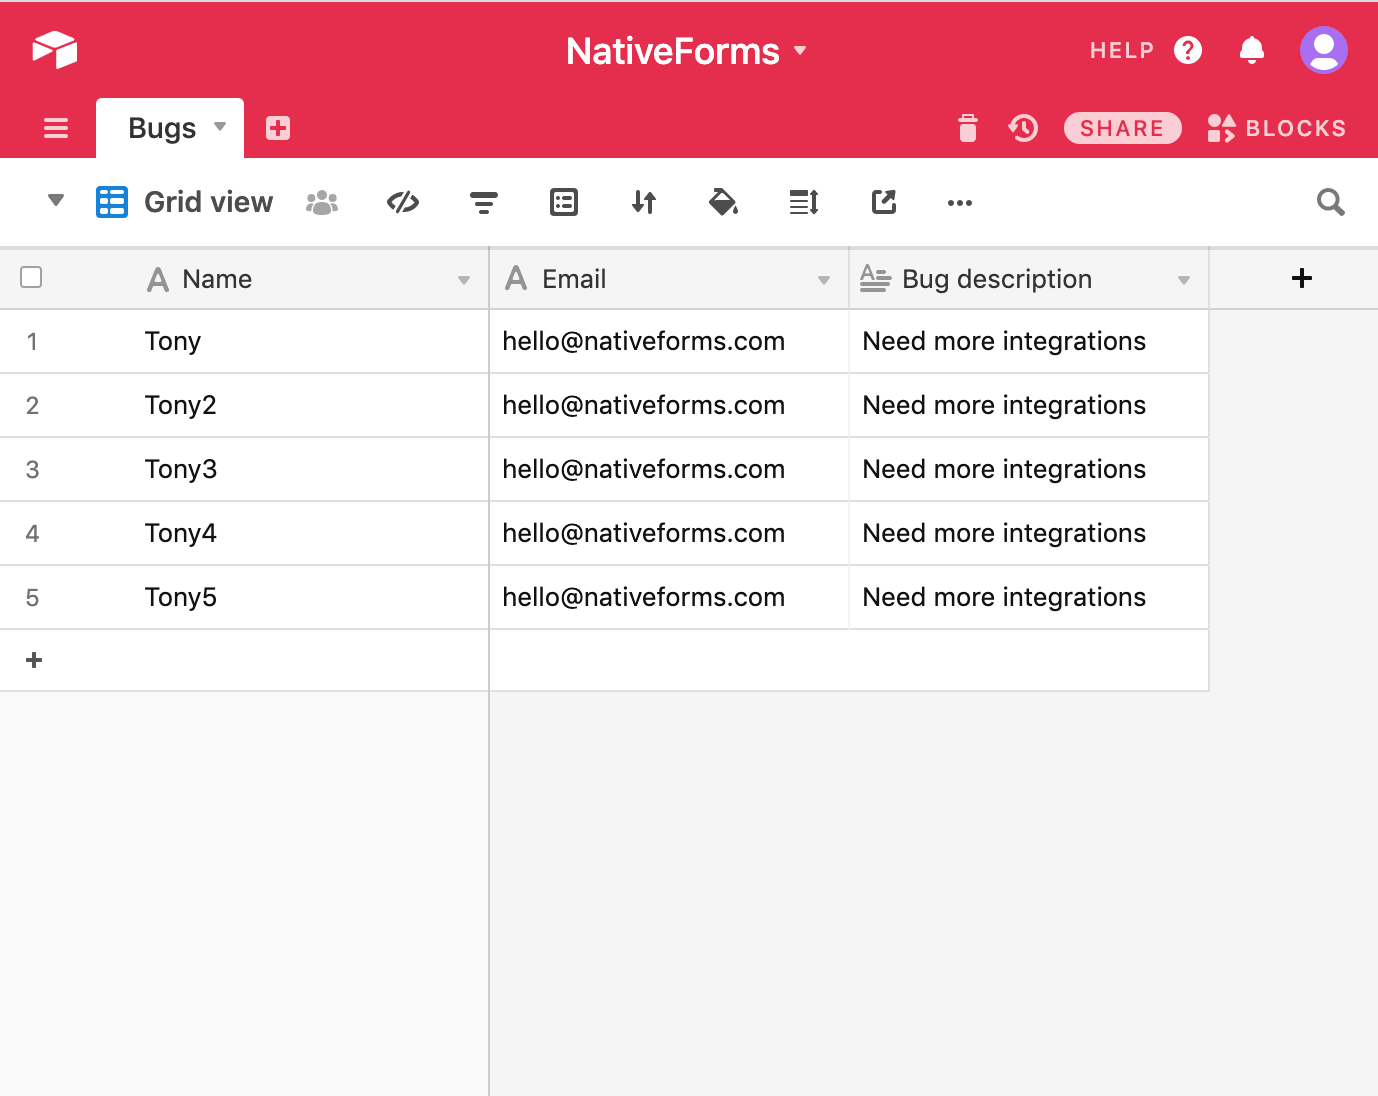 Update Airtable with form responses